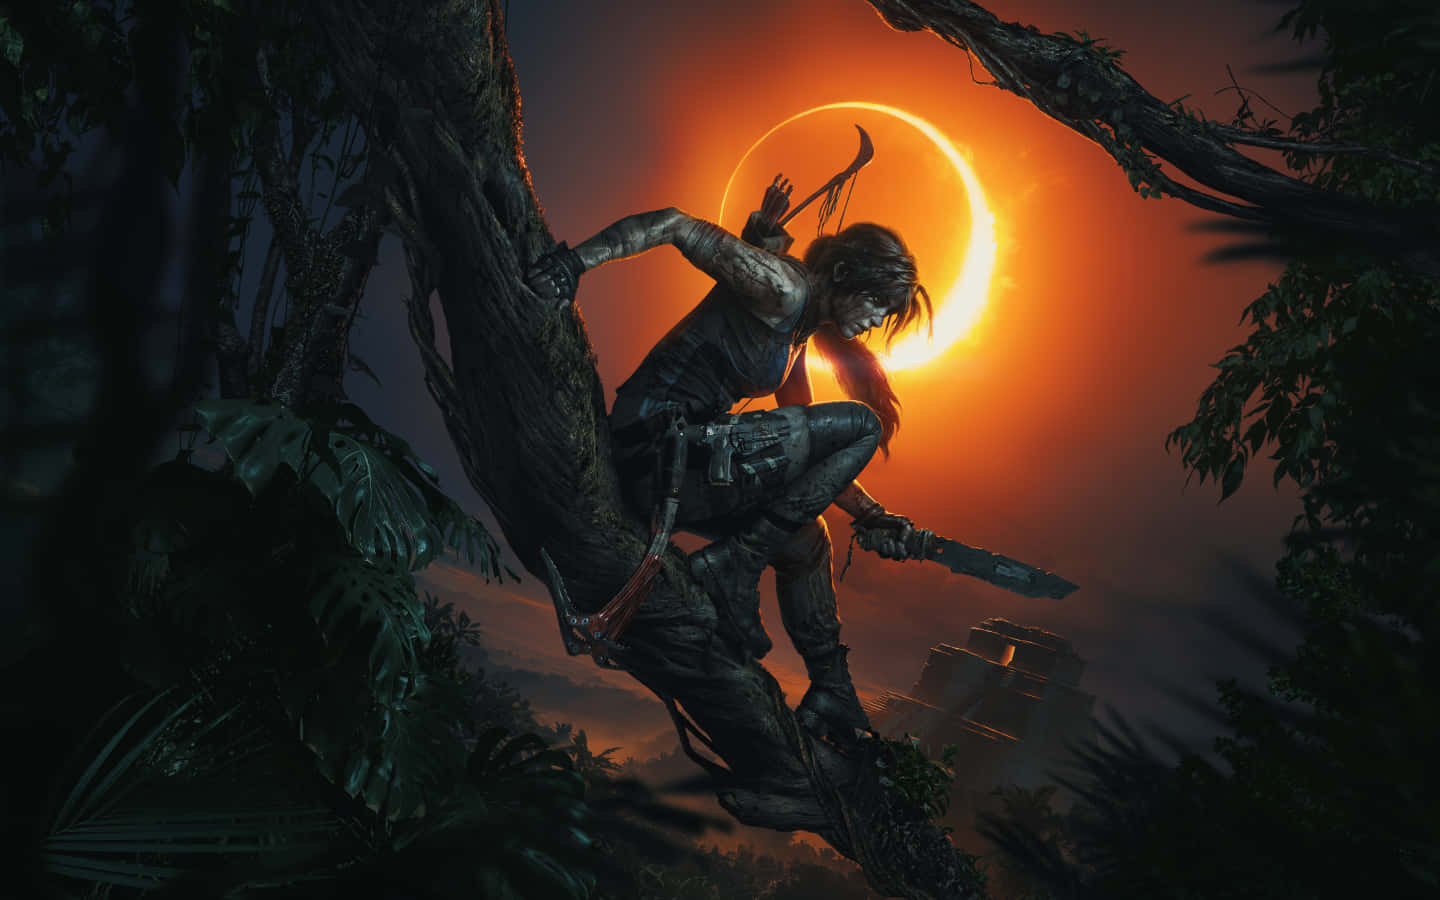 Get ready for an epic adventure with Lara Croft in Shadow of the Tomb Raider